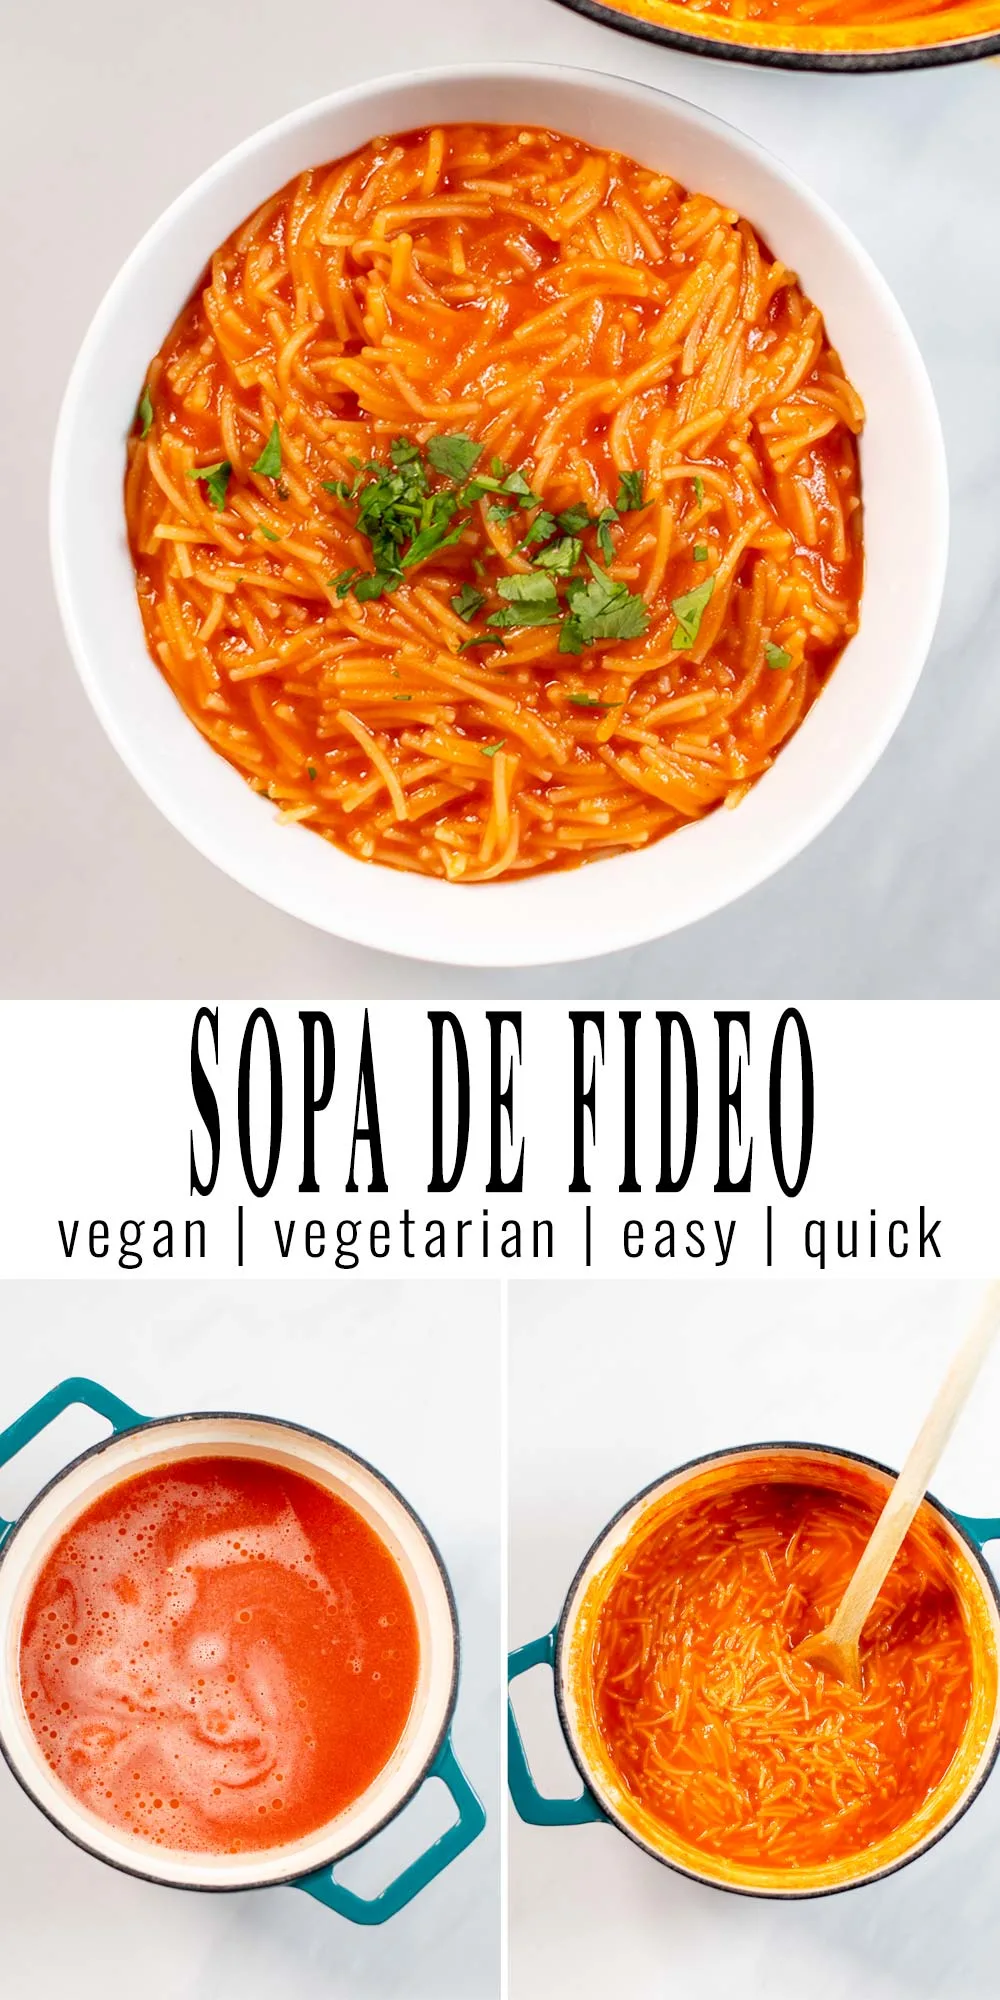 Collage of several photos showing Sopa de Fideo.